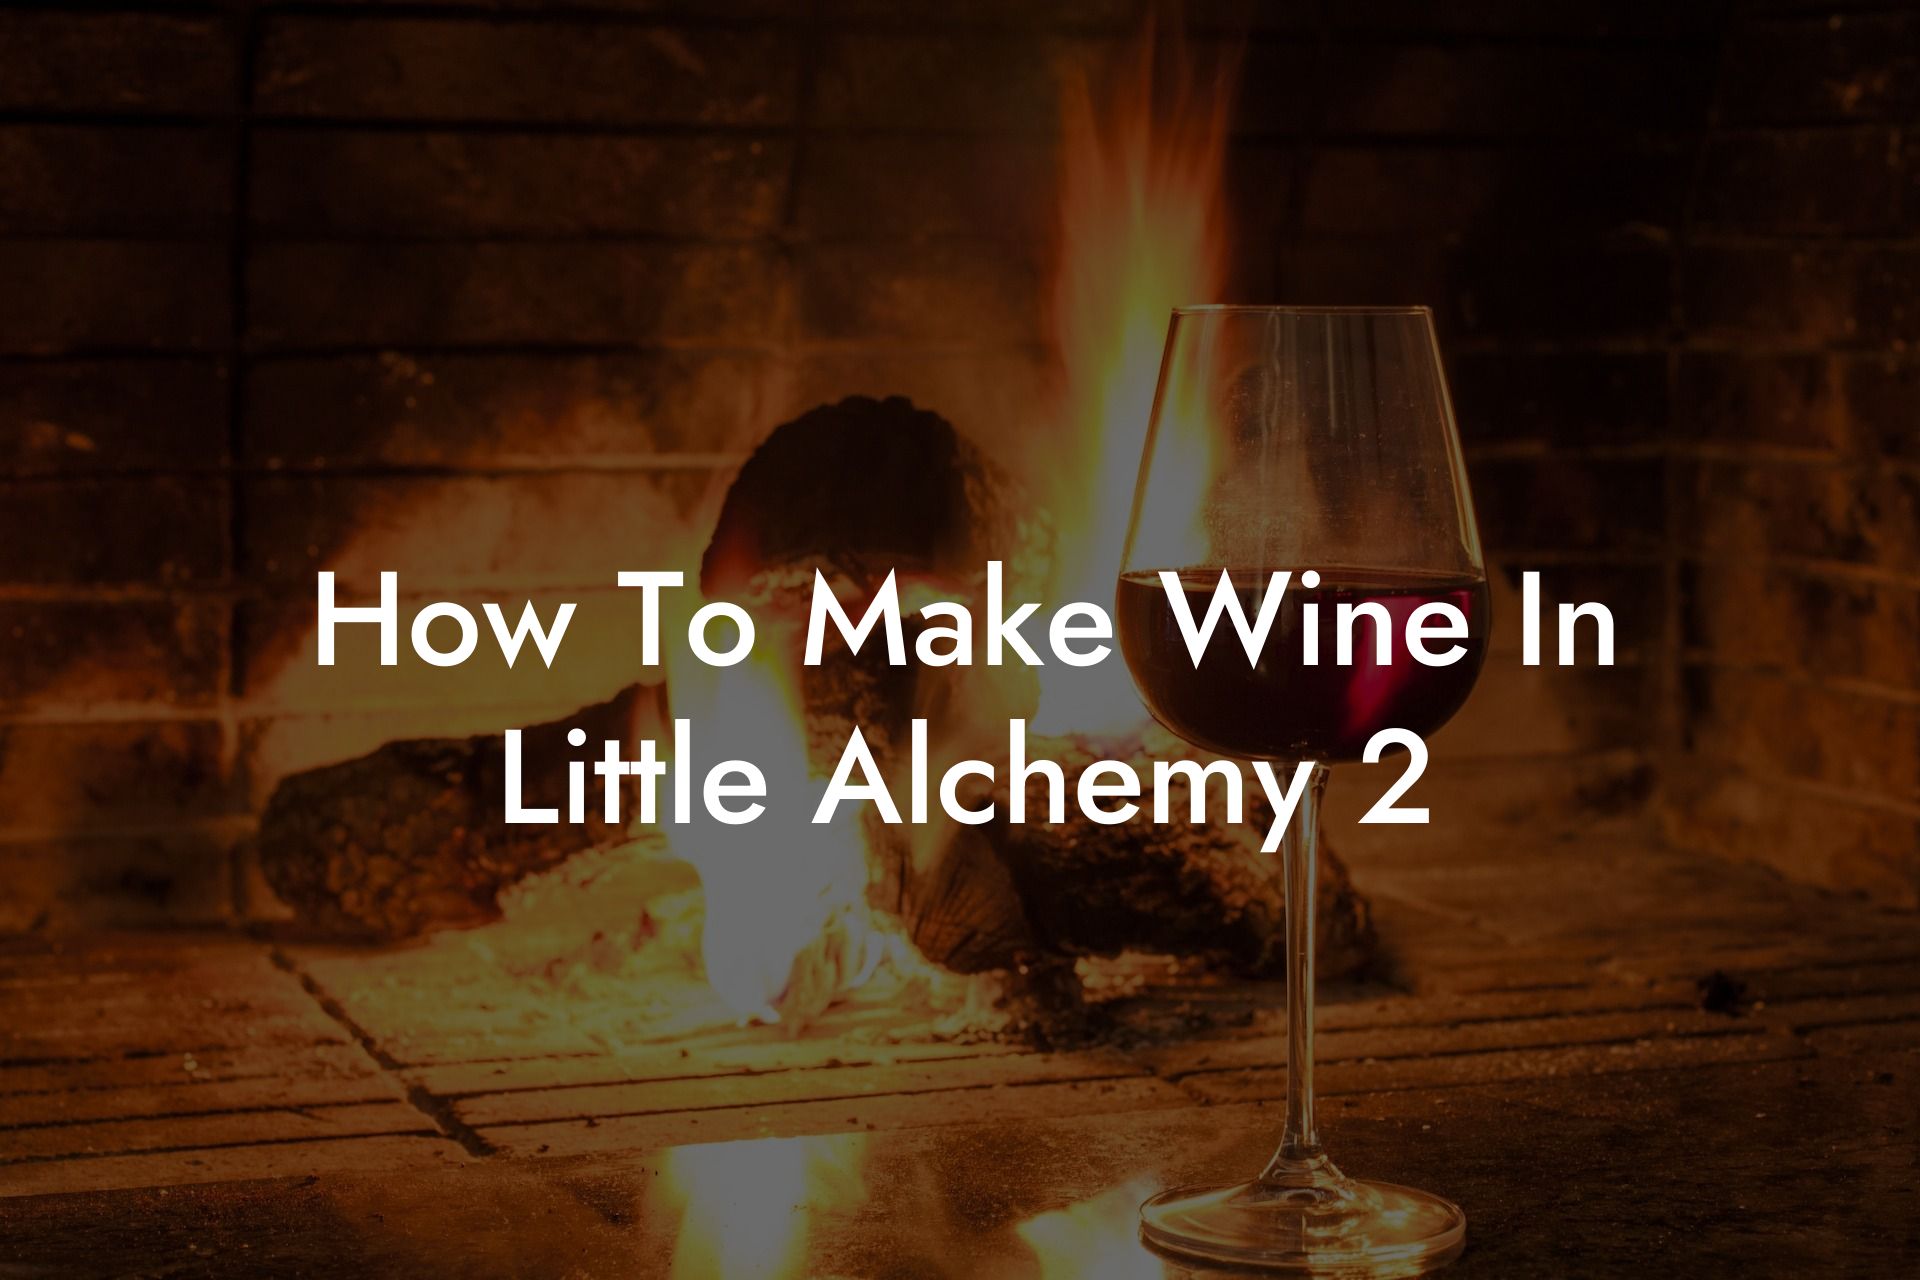 How To Make Wine In Little Alchemy 2